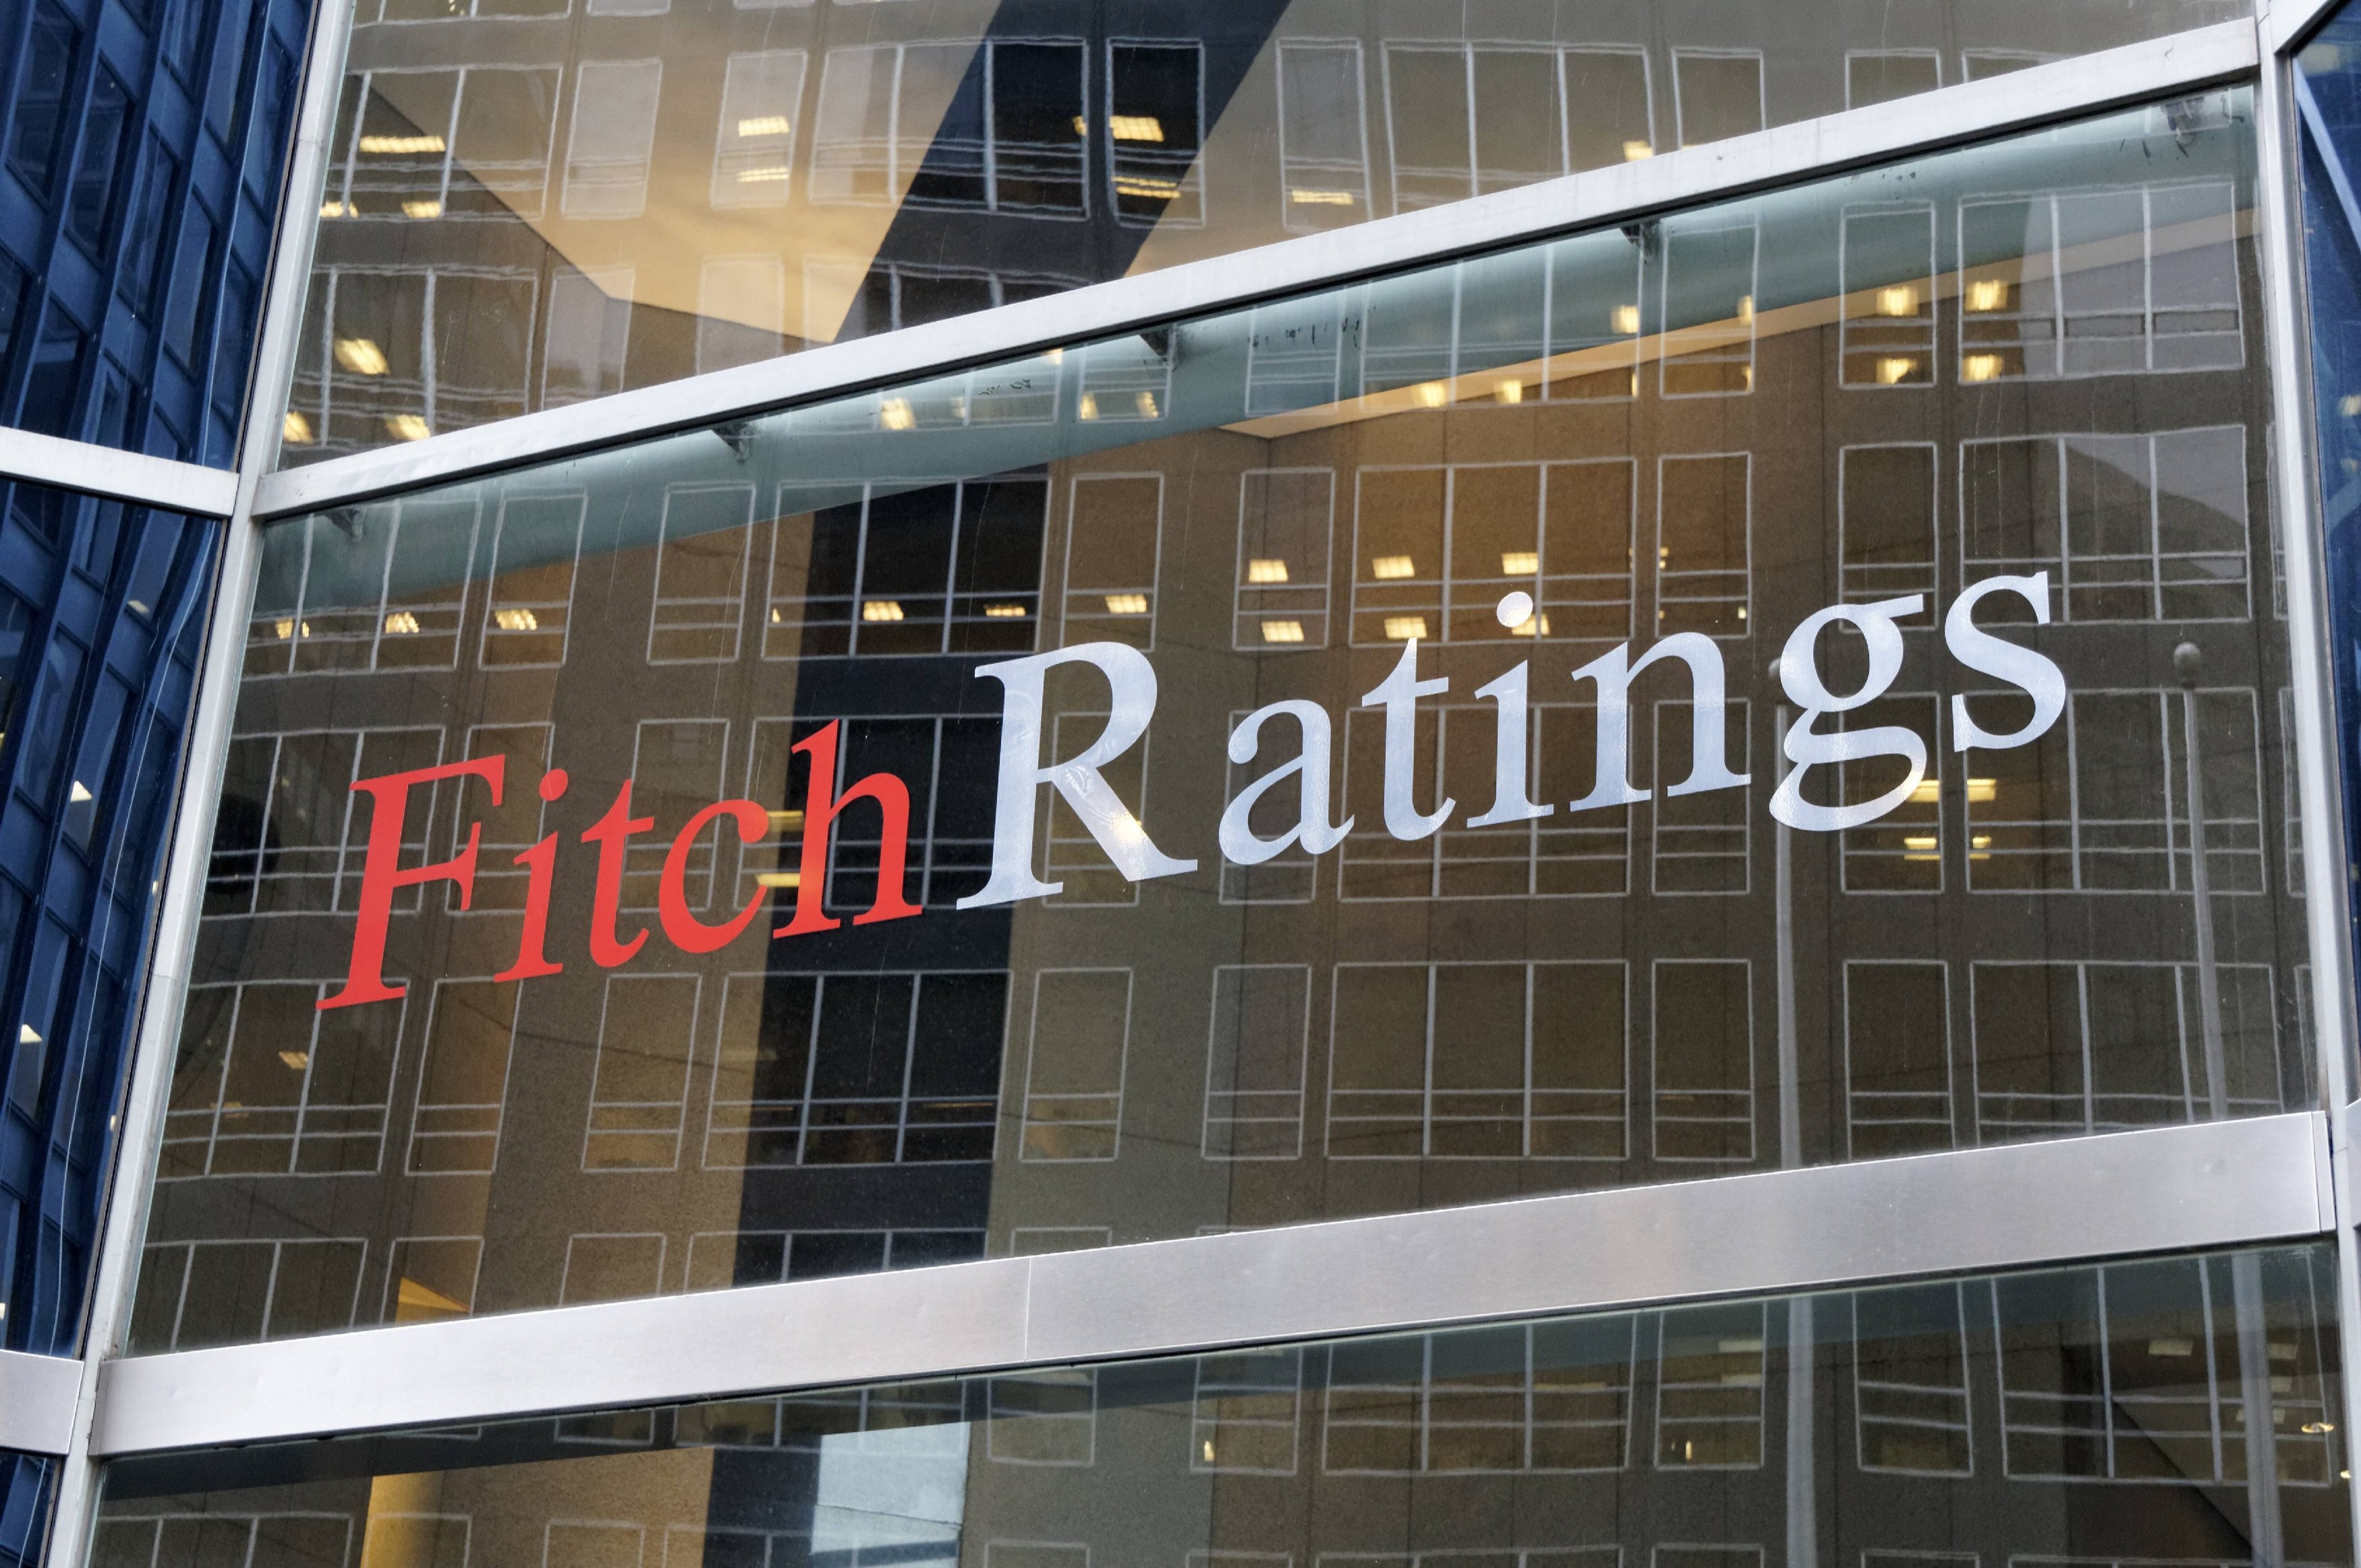 S p banking. Fitch ratings. Международное рейтинговое агентство Fitch. Агентство Fitch ratings. Фото Fitch ratings..